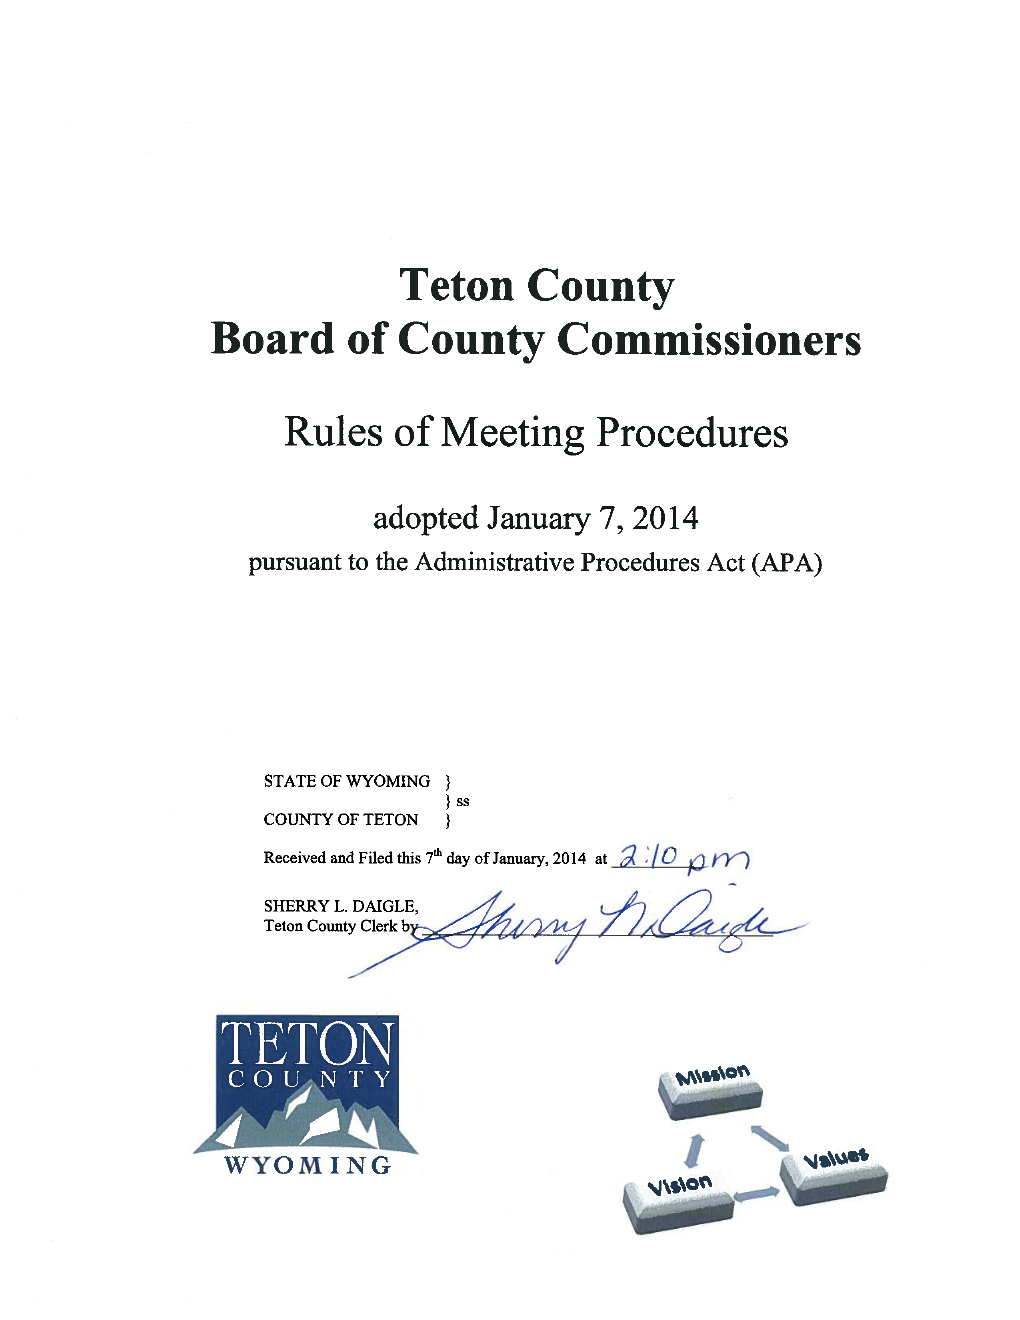 Teton County Board of County Commissioners